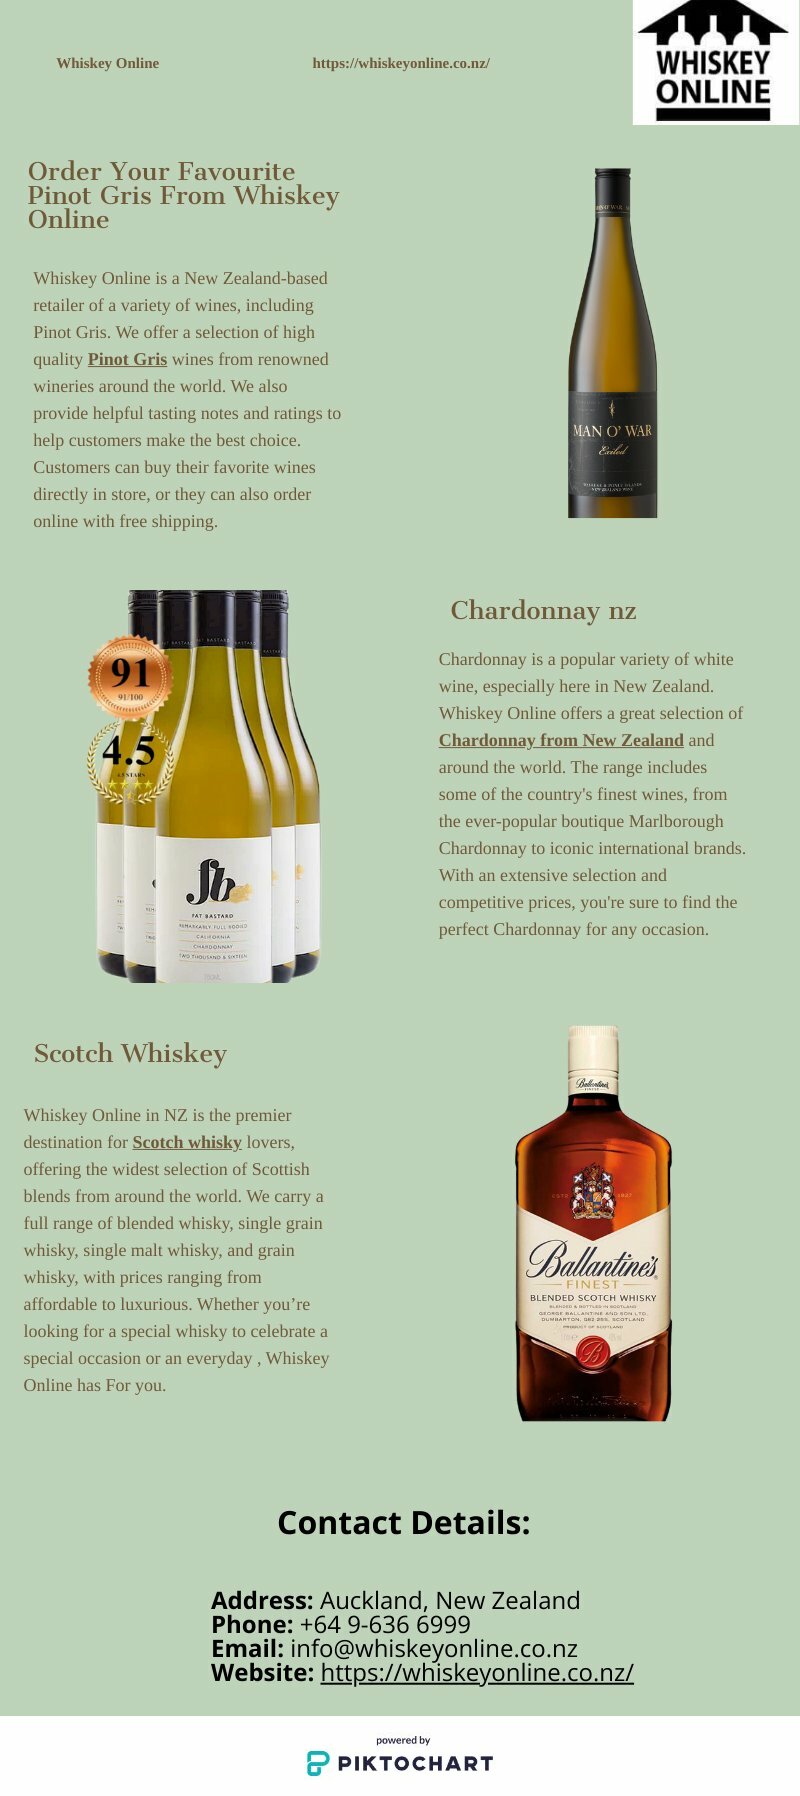 Order Your Favourite Pinot Gris From Whiskey Online | Piktochart Visual Editor